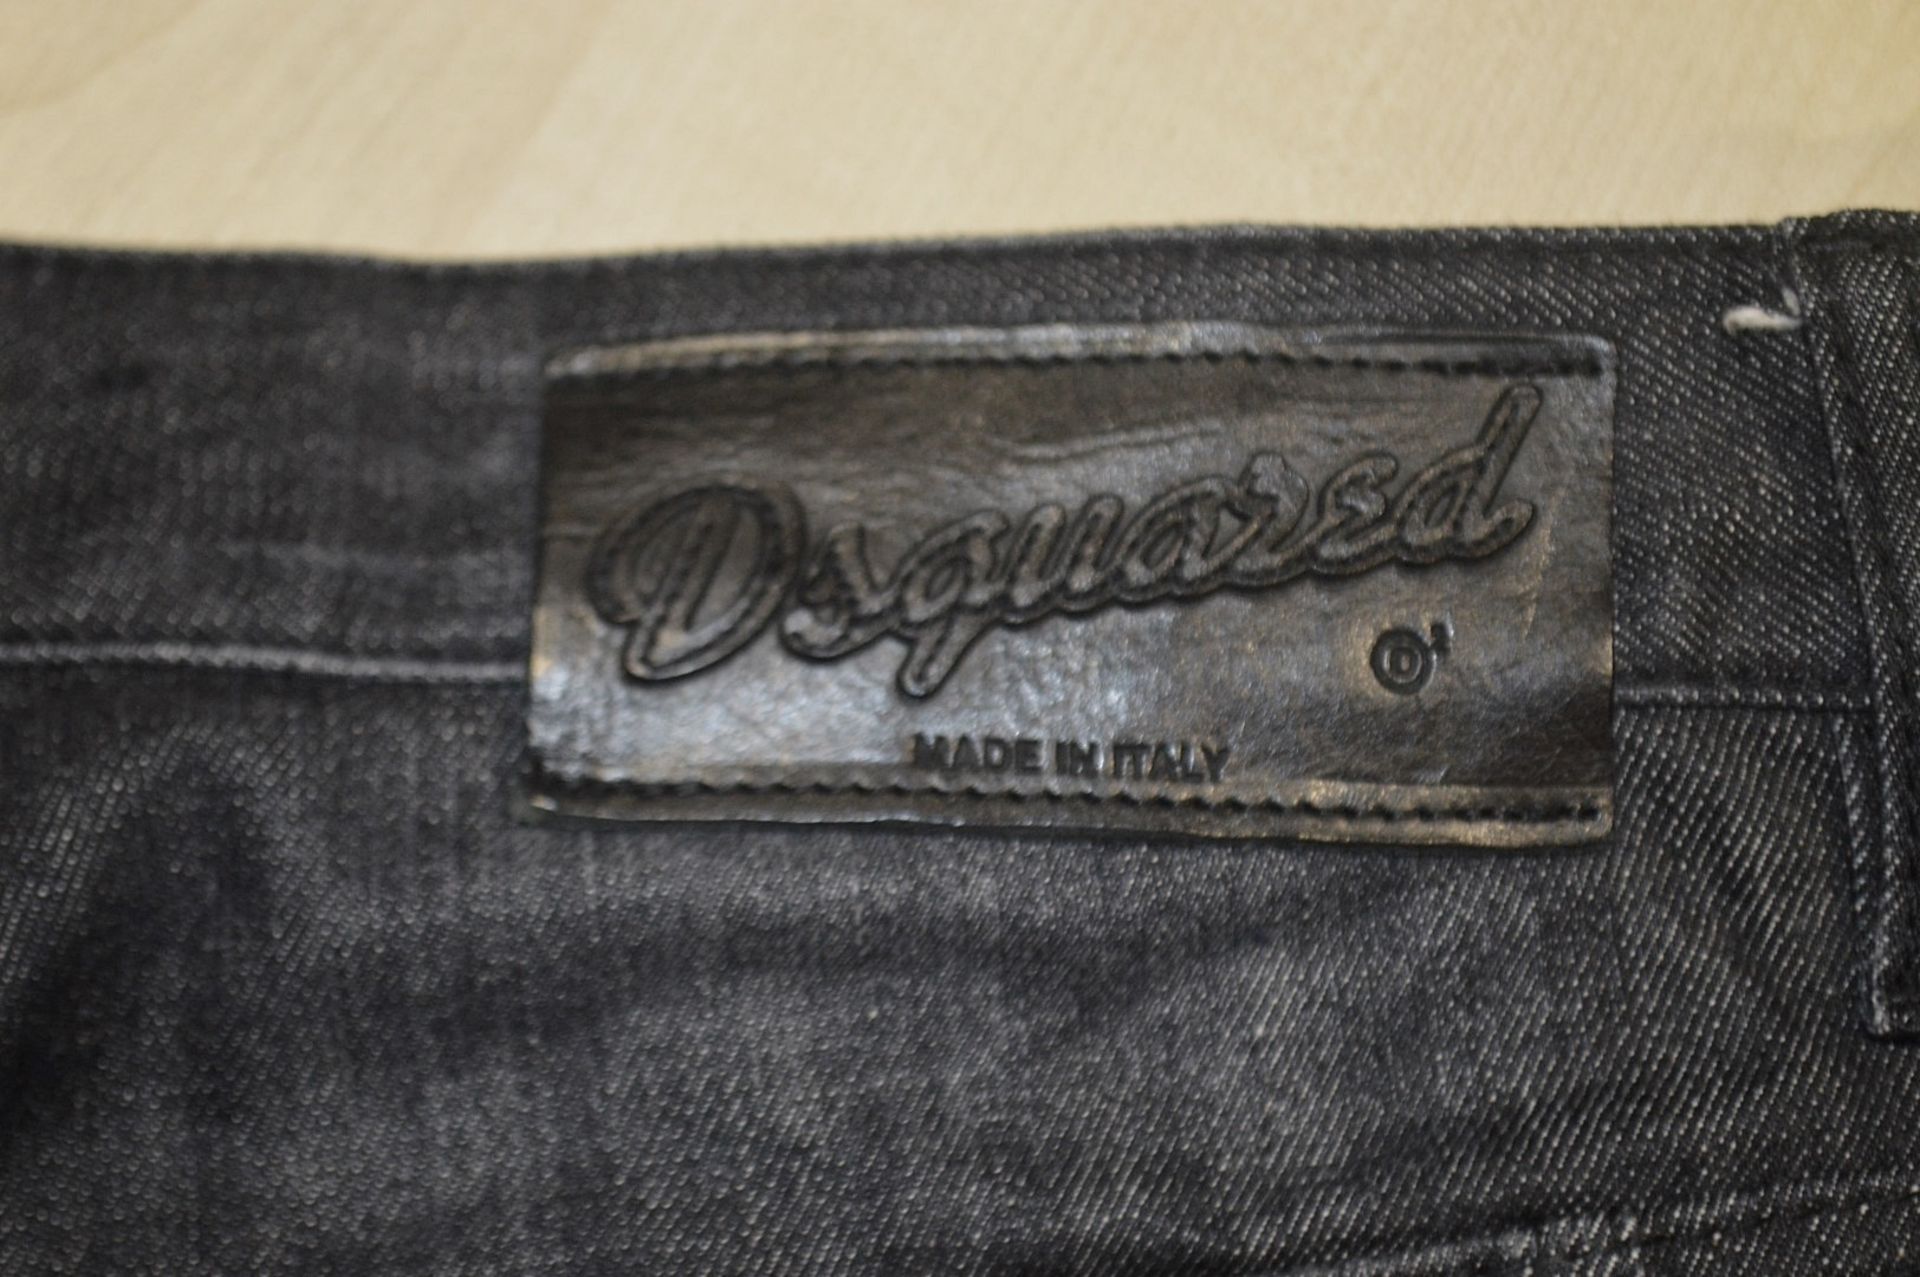 1 x Pair Of Men's Genuine Dsquared2 Distressed-Style Jeans In Washed Black - Waist Size: EU48 / UK30 - Image 7 of 8